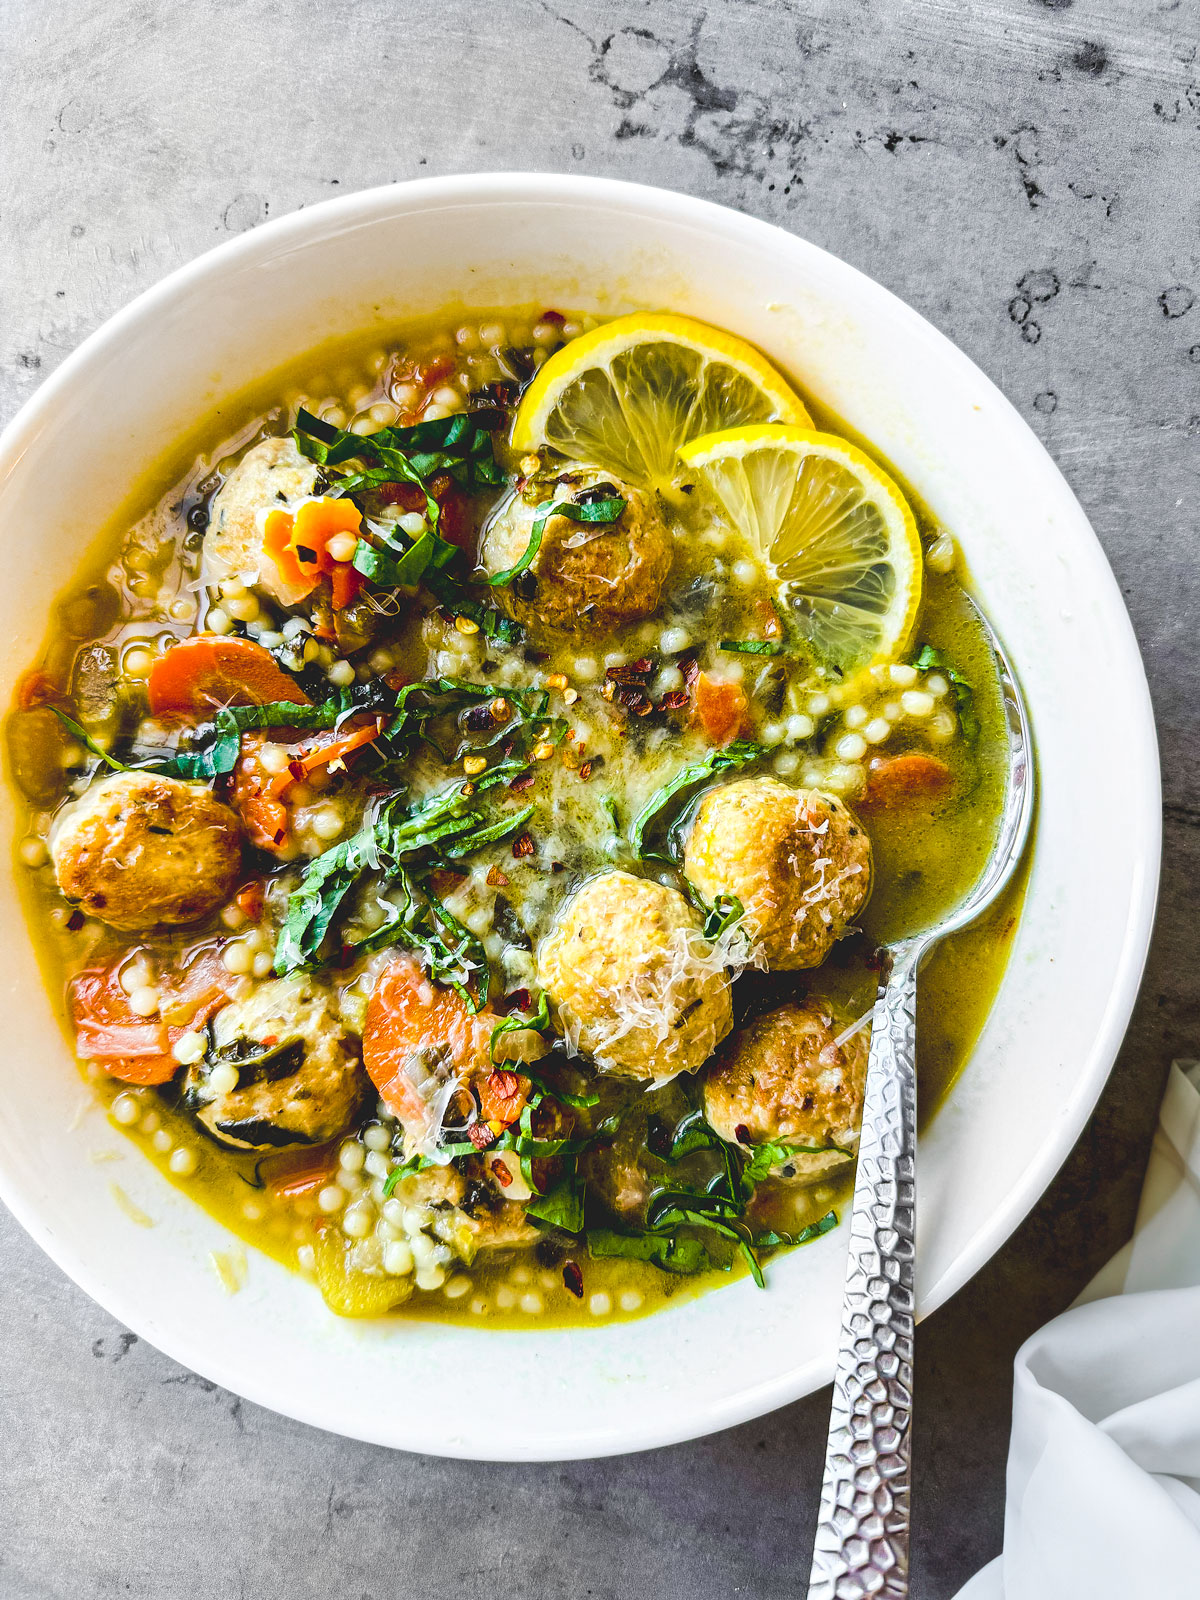 A bowl of Italian wedding soup with chicken meatballs.